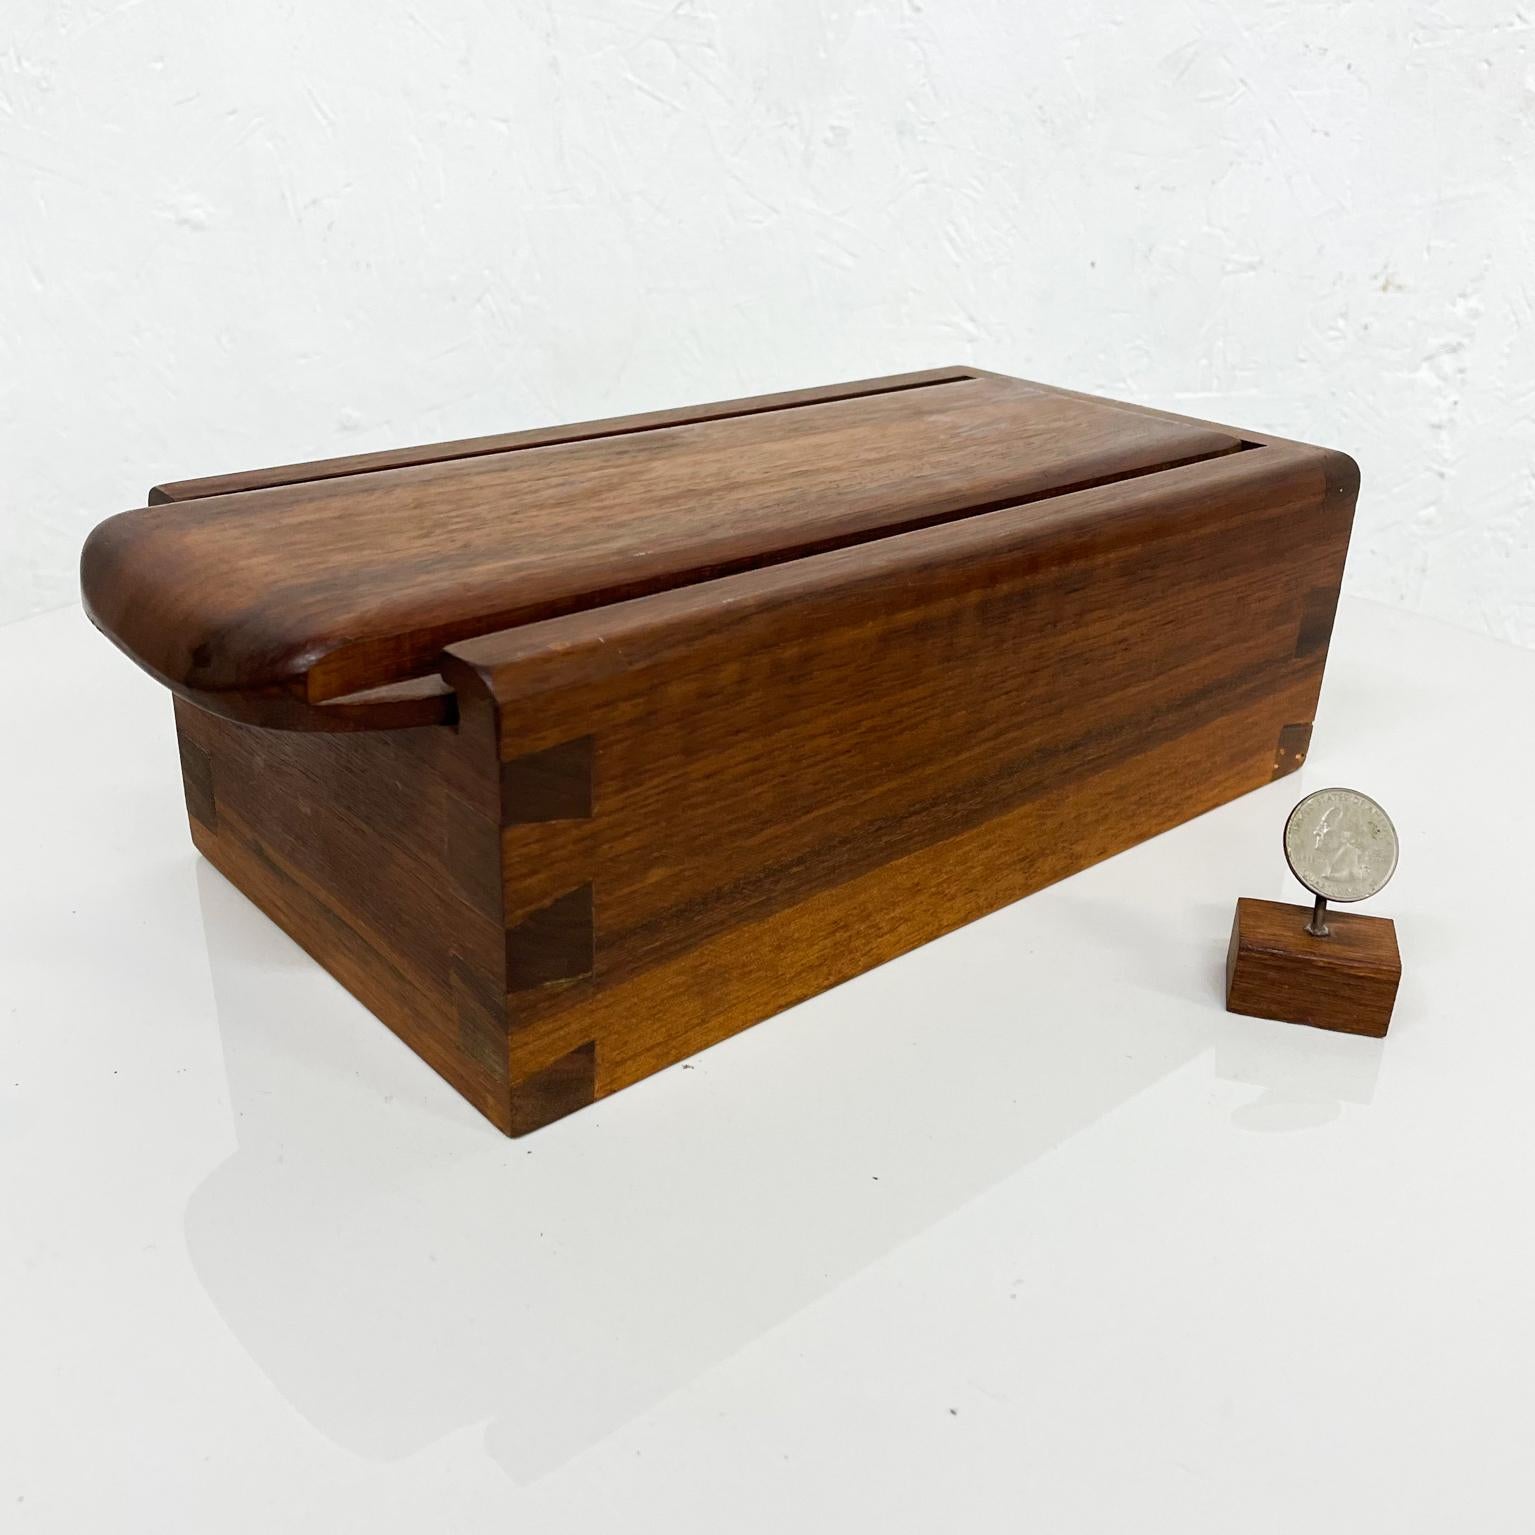 Walnut wood box.
1960s Studio piece walnut wood box clean modern design.
No label. George Nakashima inspired.
Measures: 11.5 deep x 5.63 wide x 3.63 tall
Walnut wood double dove tail joints Slide open door at top.
Preowned original vintage